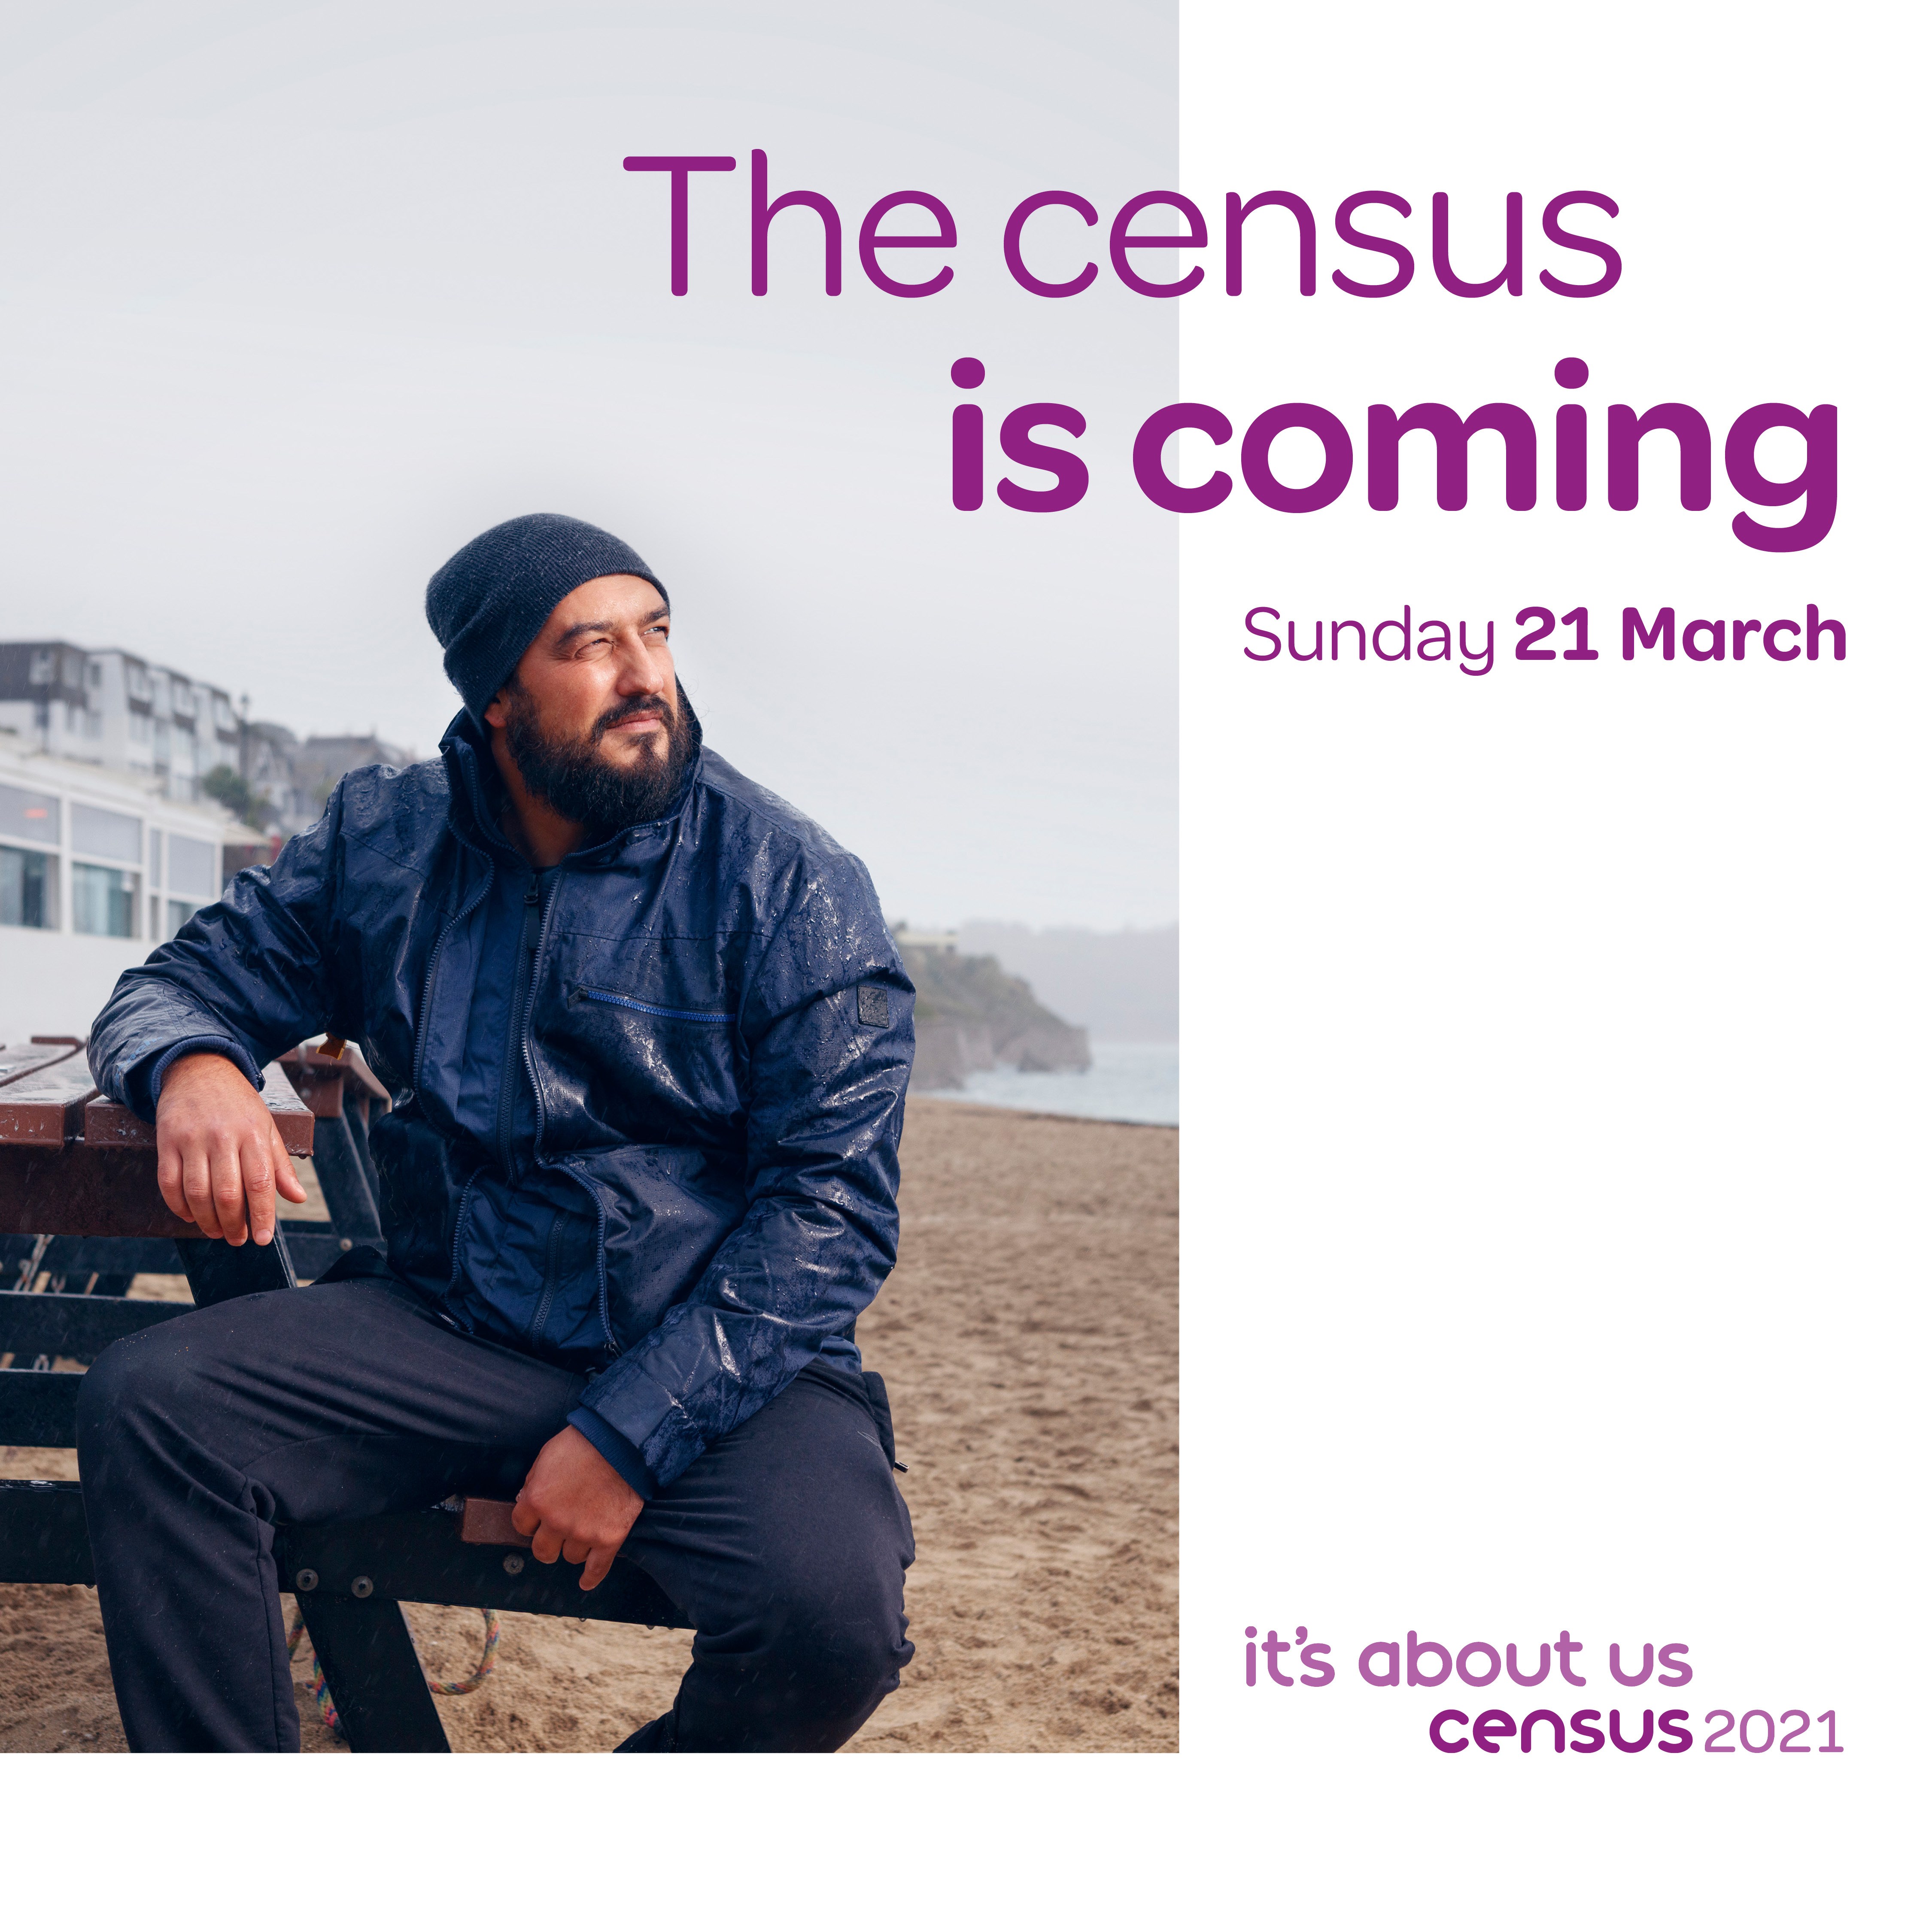 The census is coming on Sunday 21 March